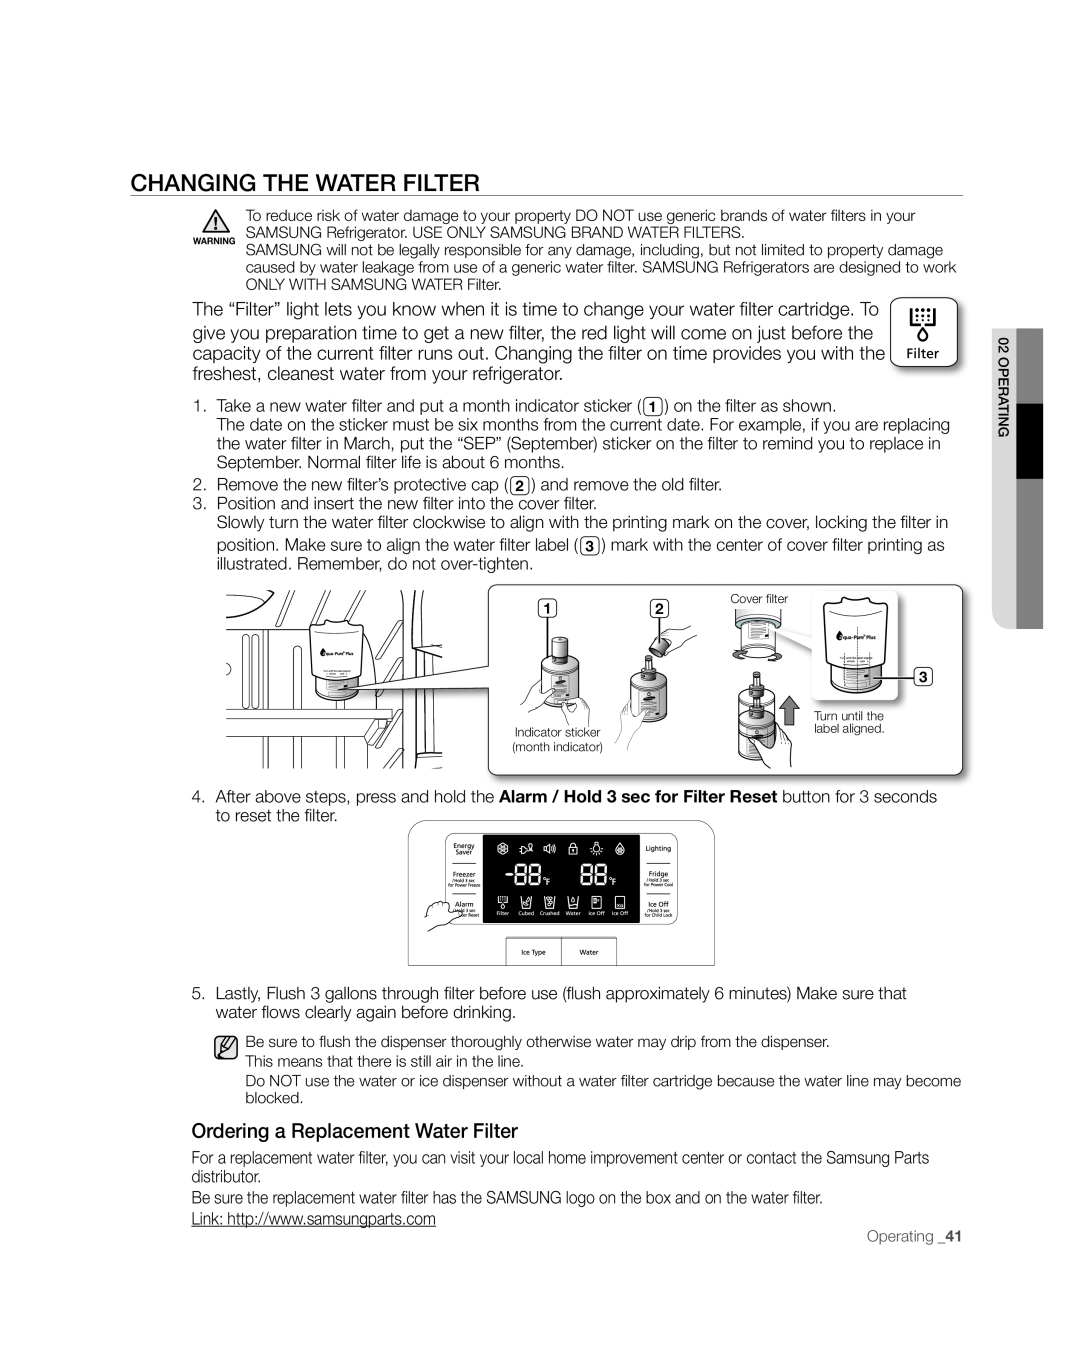 Samsung RFG237, RFG238AARS user manual CHAnGinG tHE wAtER FiLtER, Ordering a Replacement Water Filter 